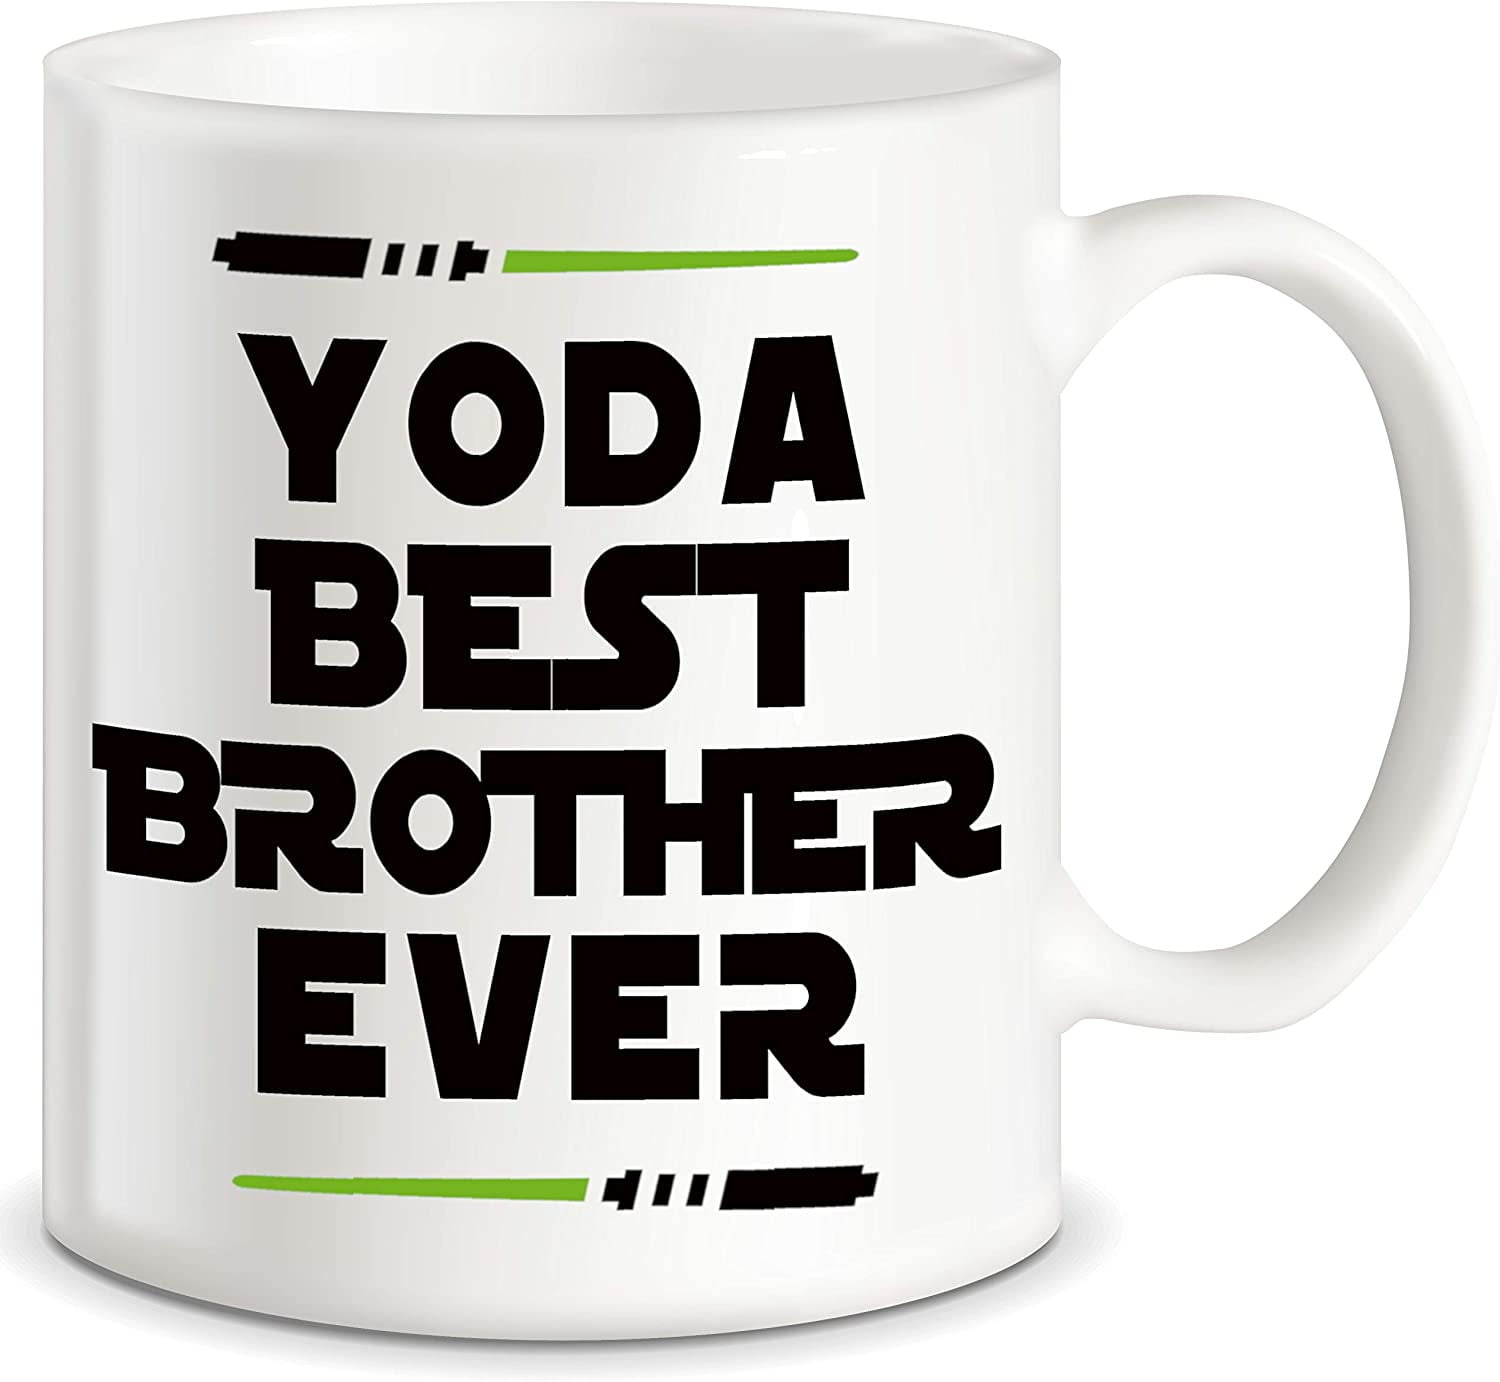 Ousside You Must Cash Me Funny Star Wars Yoda Coffee Mug or Tea Cup Parody by BeeGeeTees 11 oz